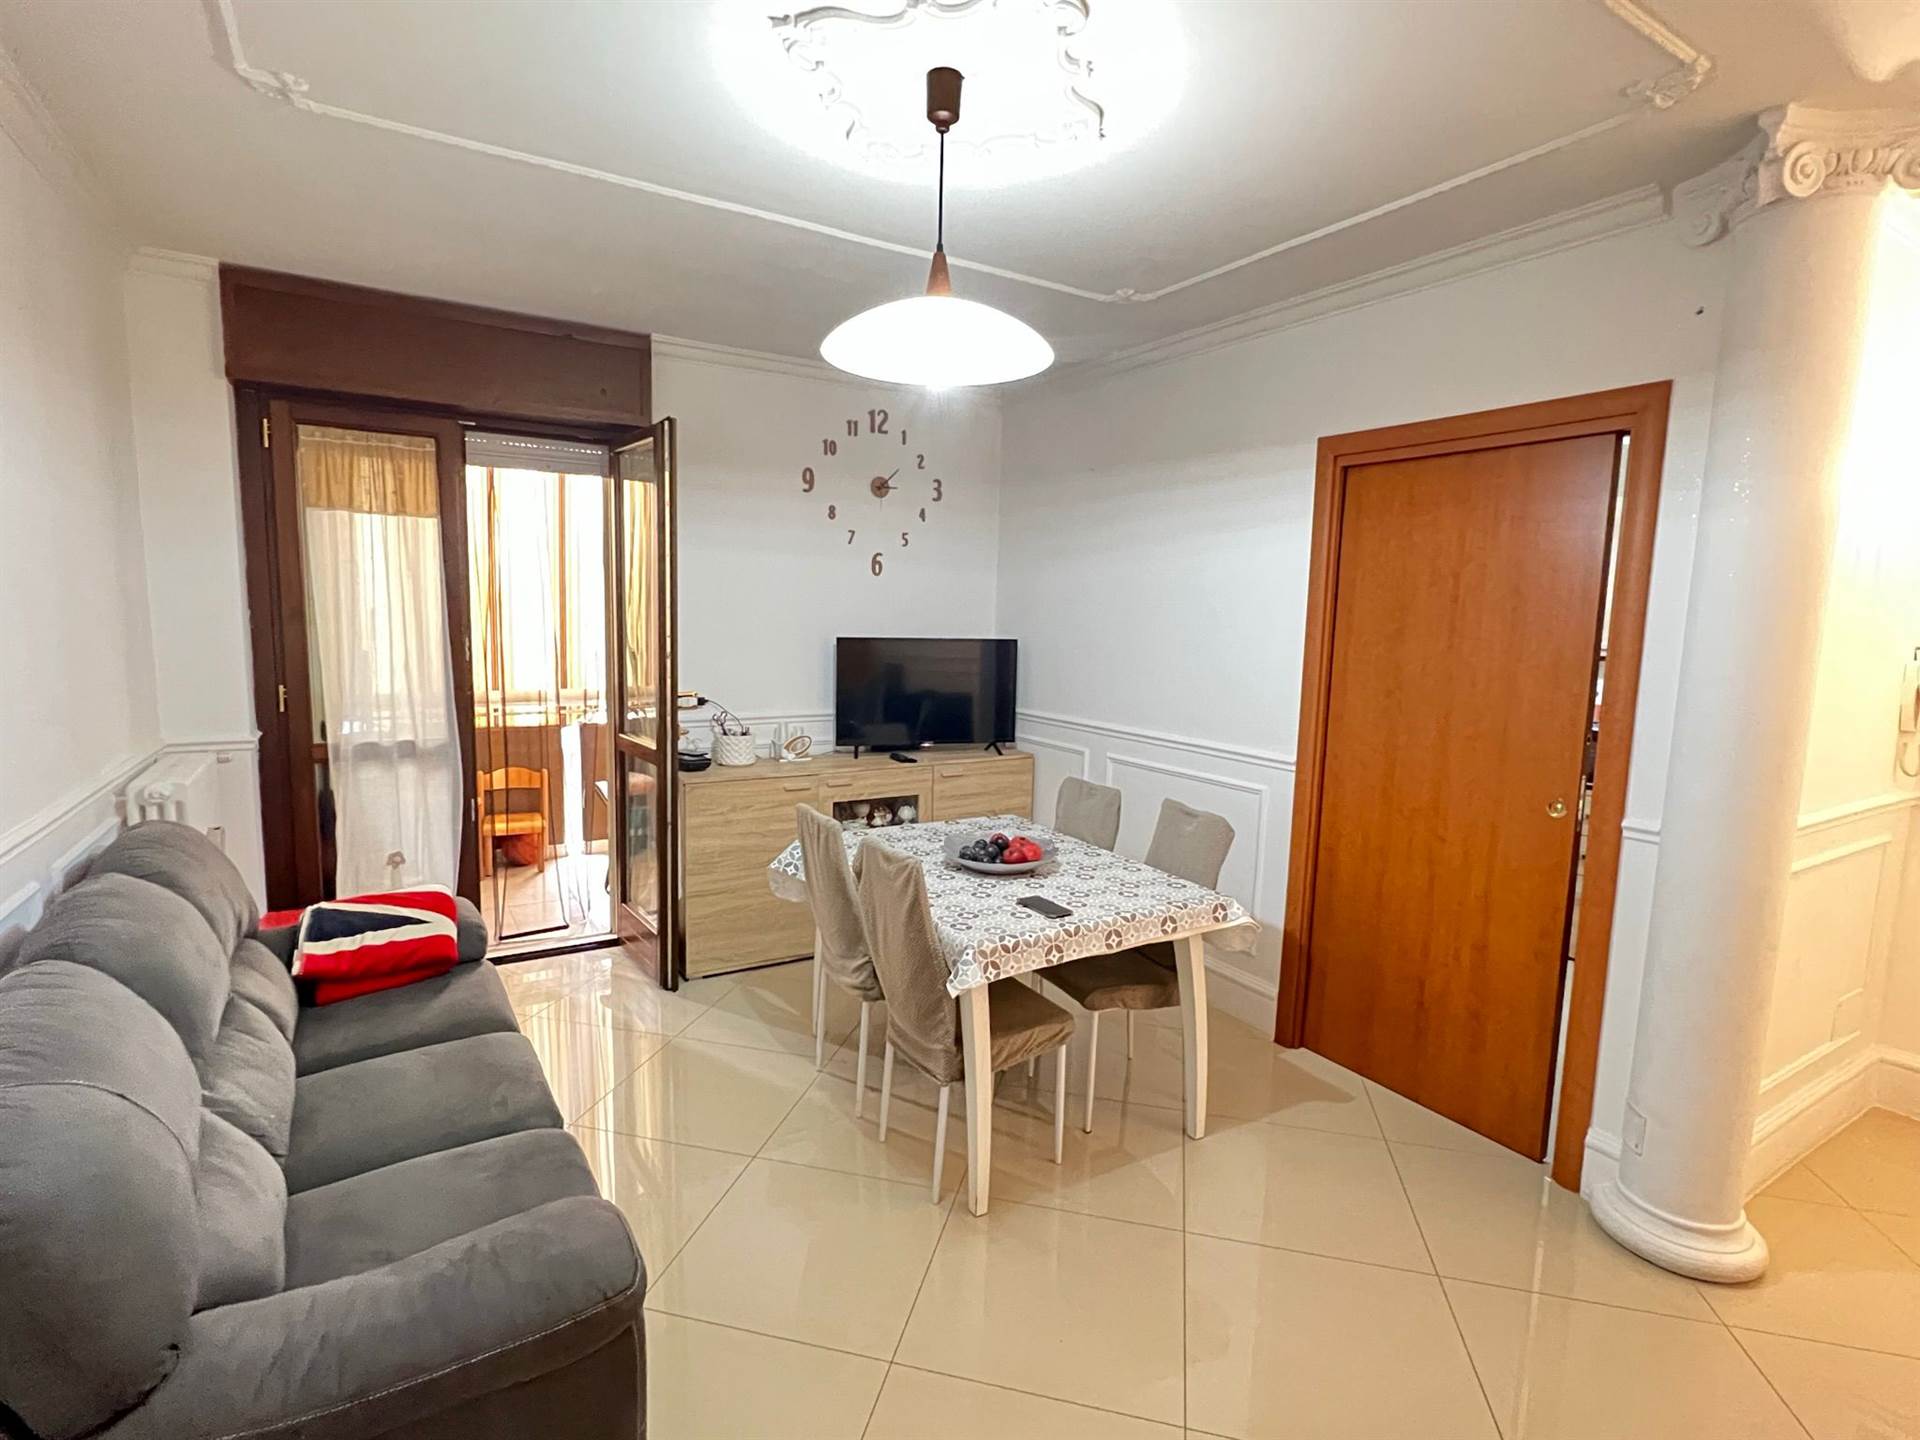 CAPO SCARDICCHIO, OSPEDALE SAN PAOLO, BARI, Apartment for sale of 80 Sq. mt., Excellent Condition, Heating Individual heating system, placed at 7° on 